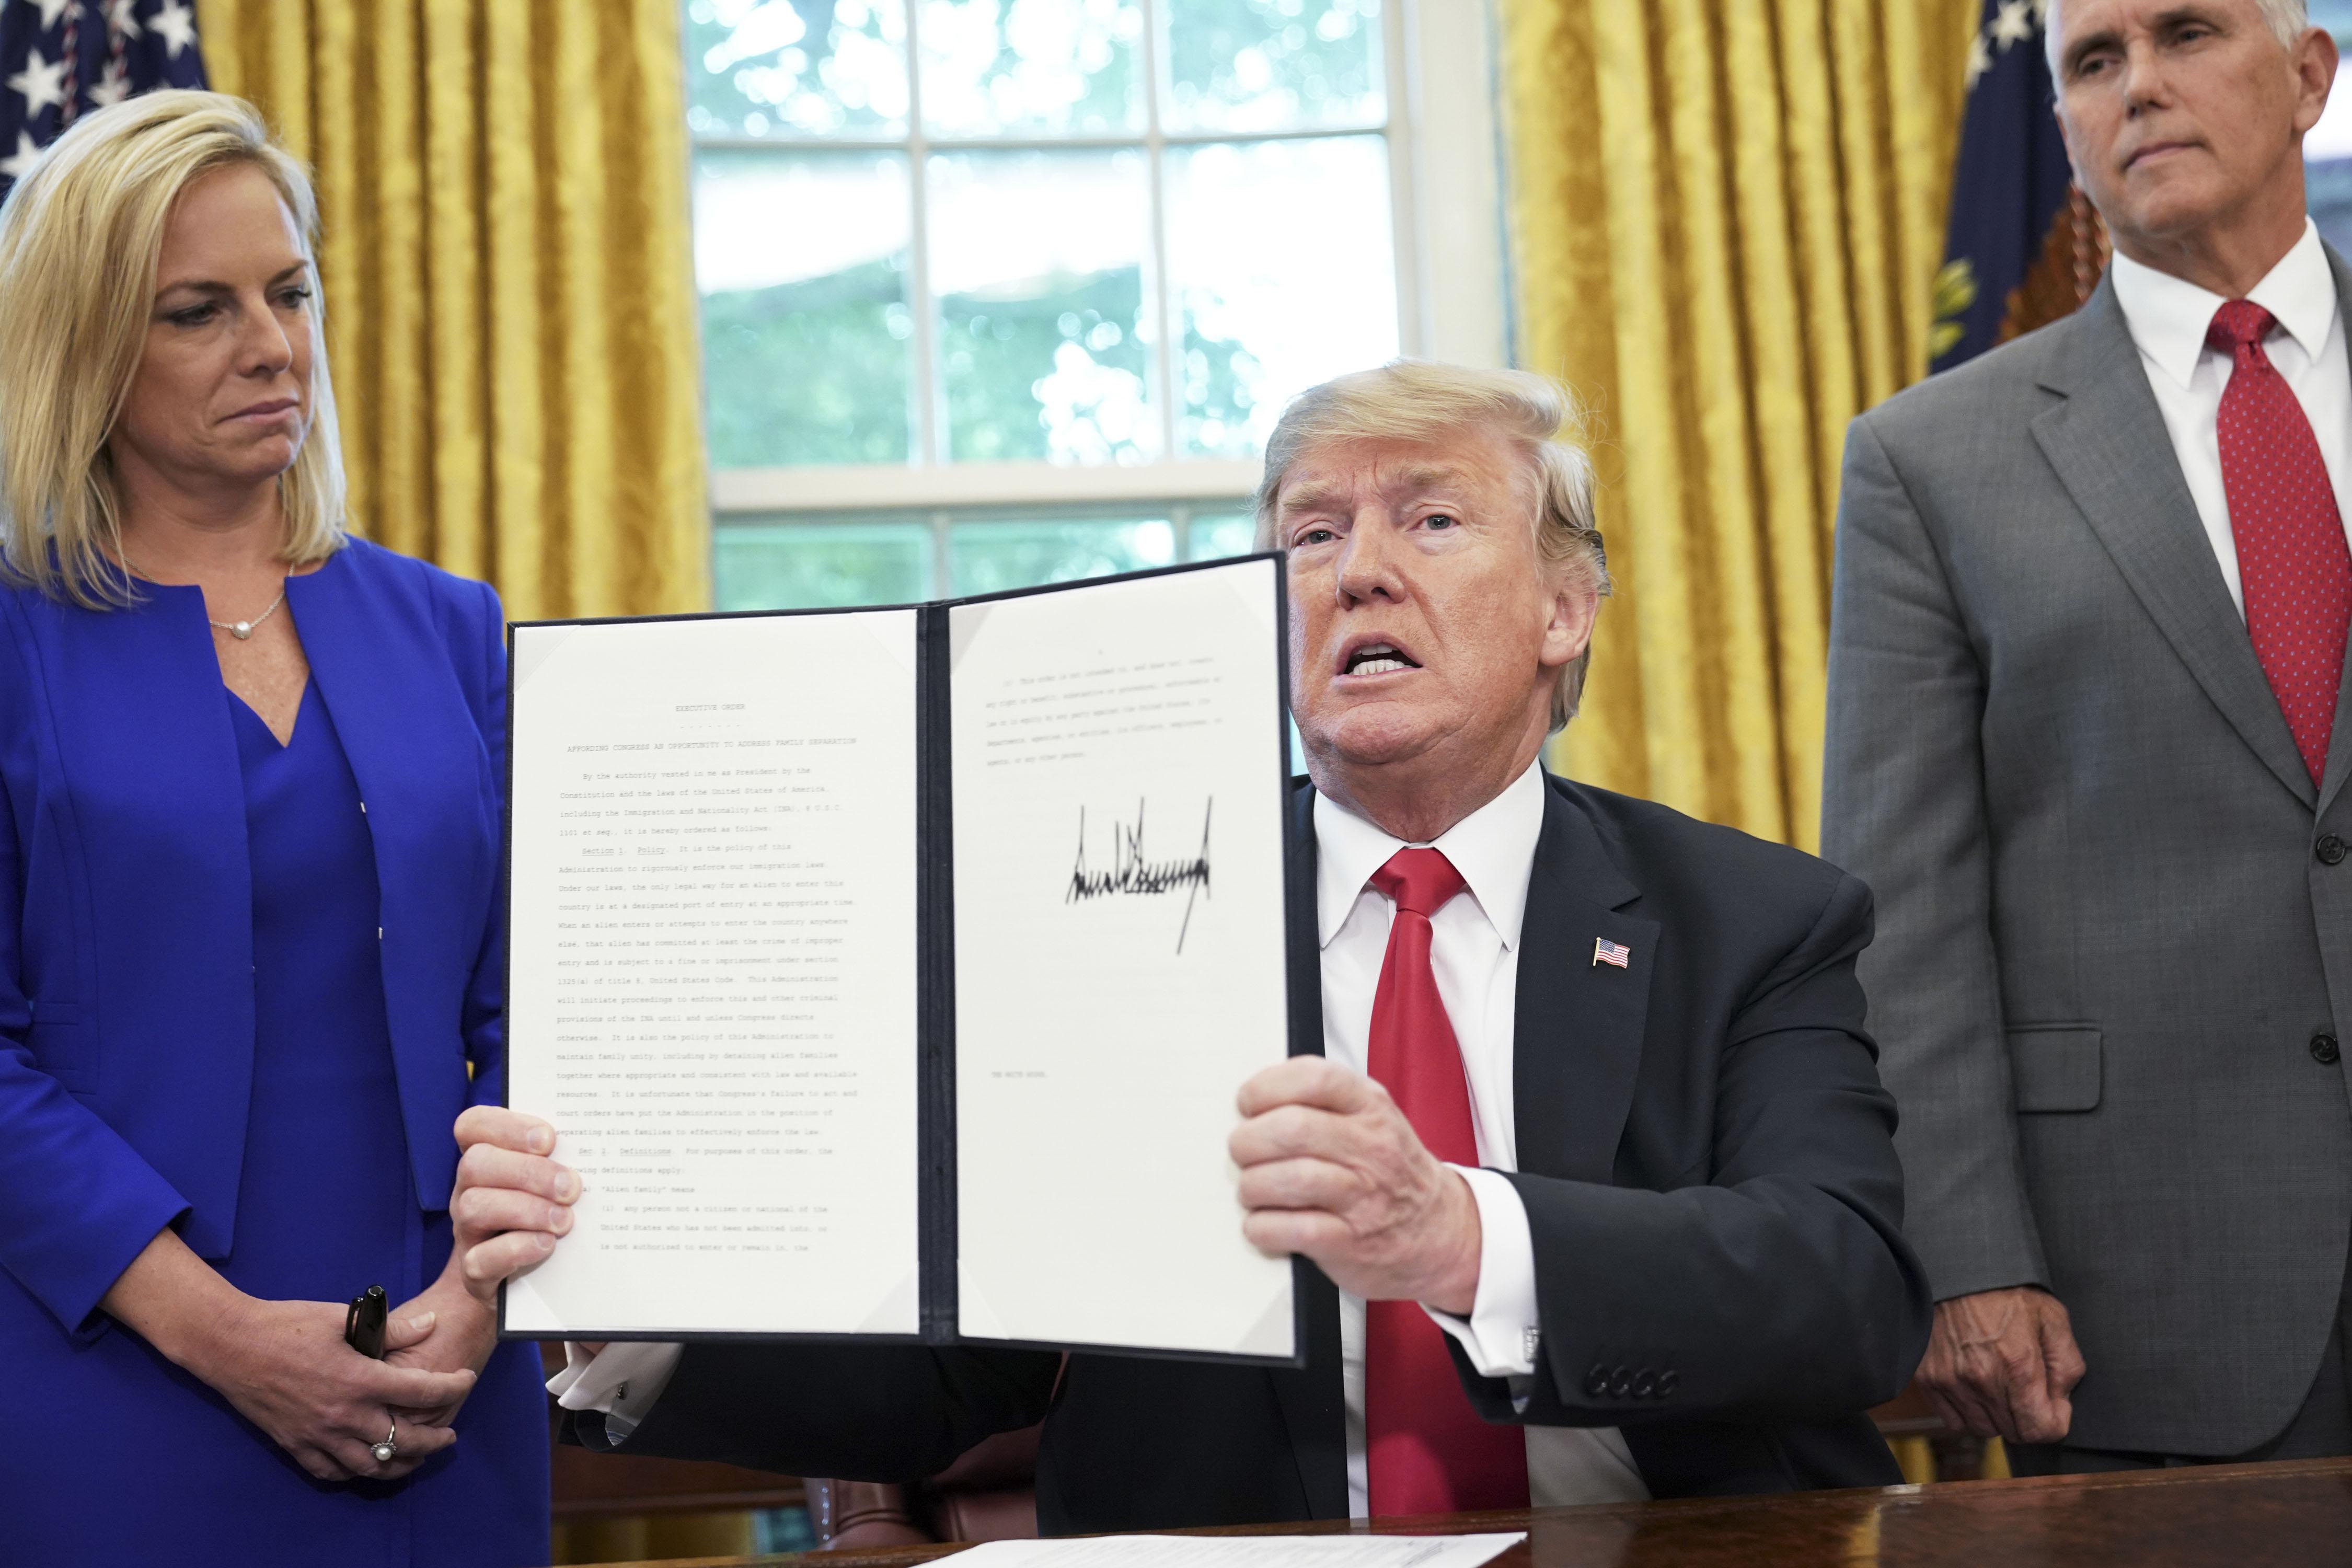 Kirstjen Nielsen, Vice President Mike Pence, President Donald Trump with the immigration executive order.